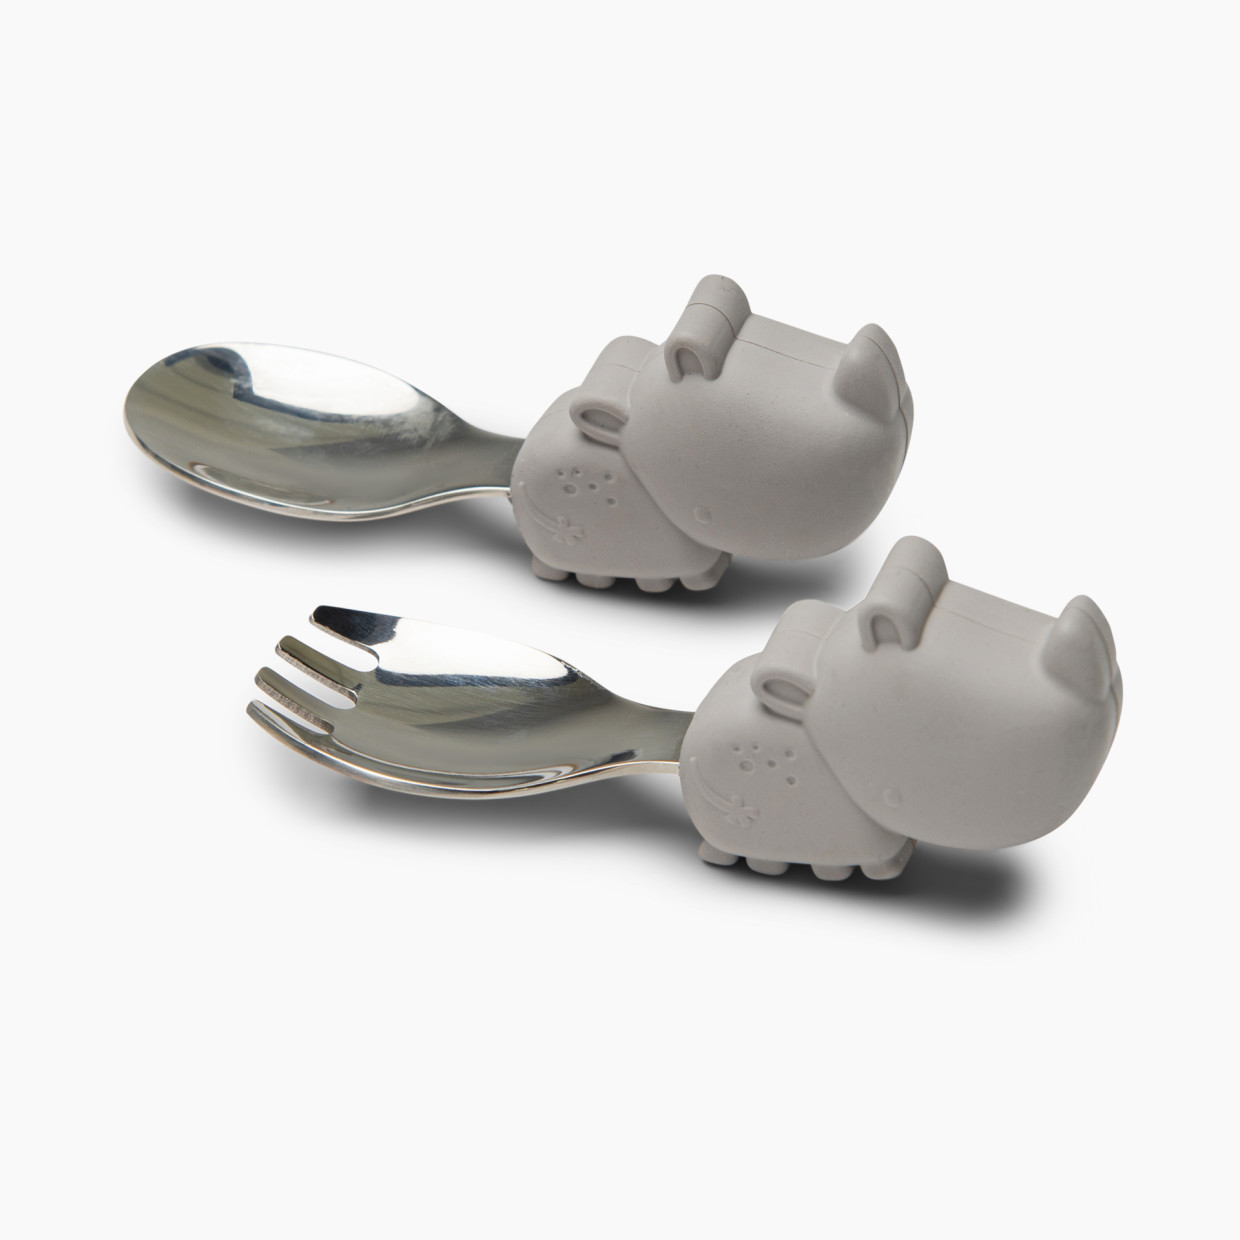 Loulou Lollipop Born to be Wild Learning Spoon and Fork Set - Rhino.